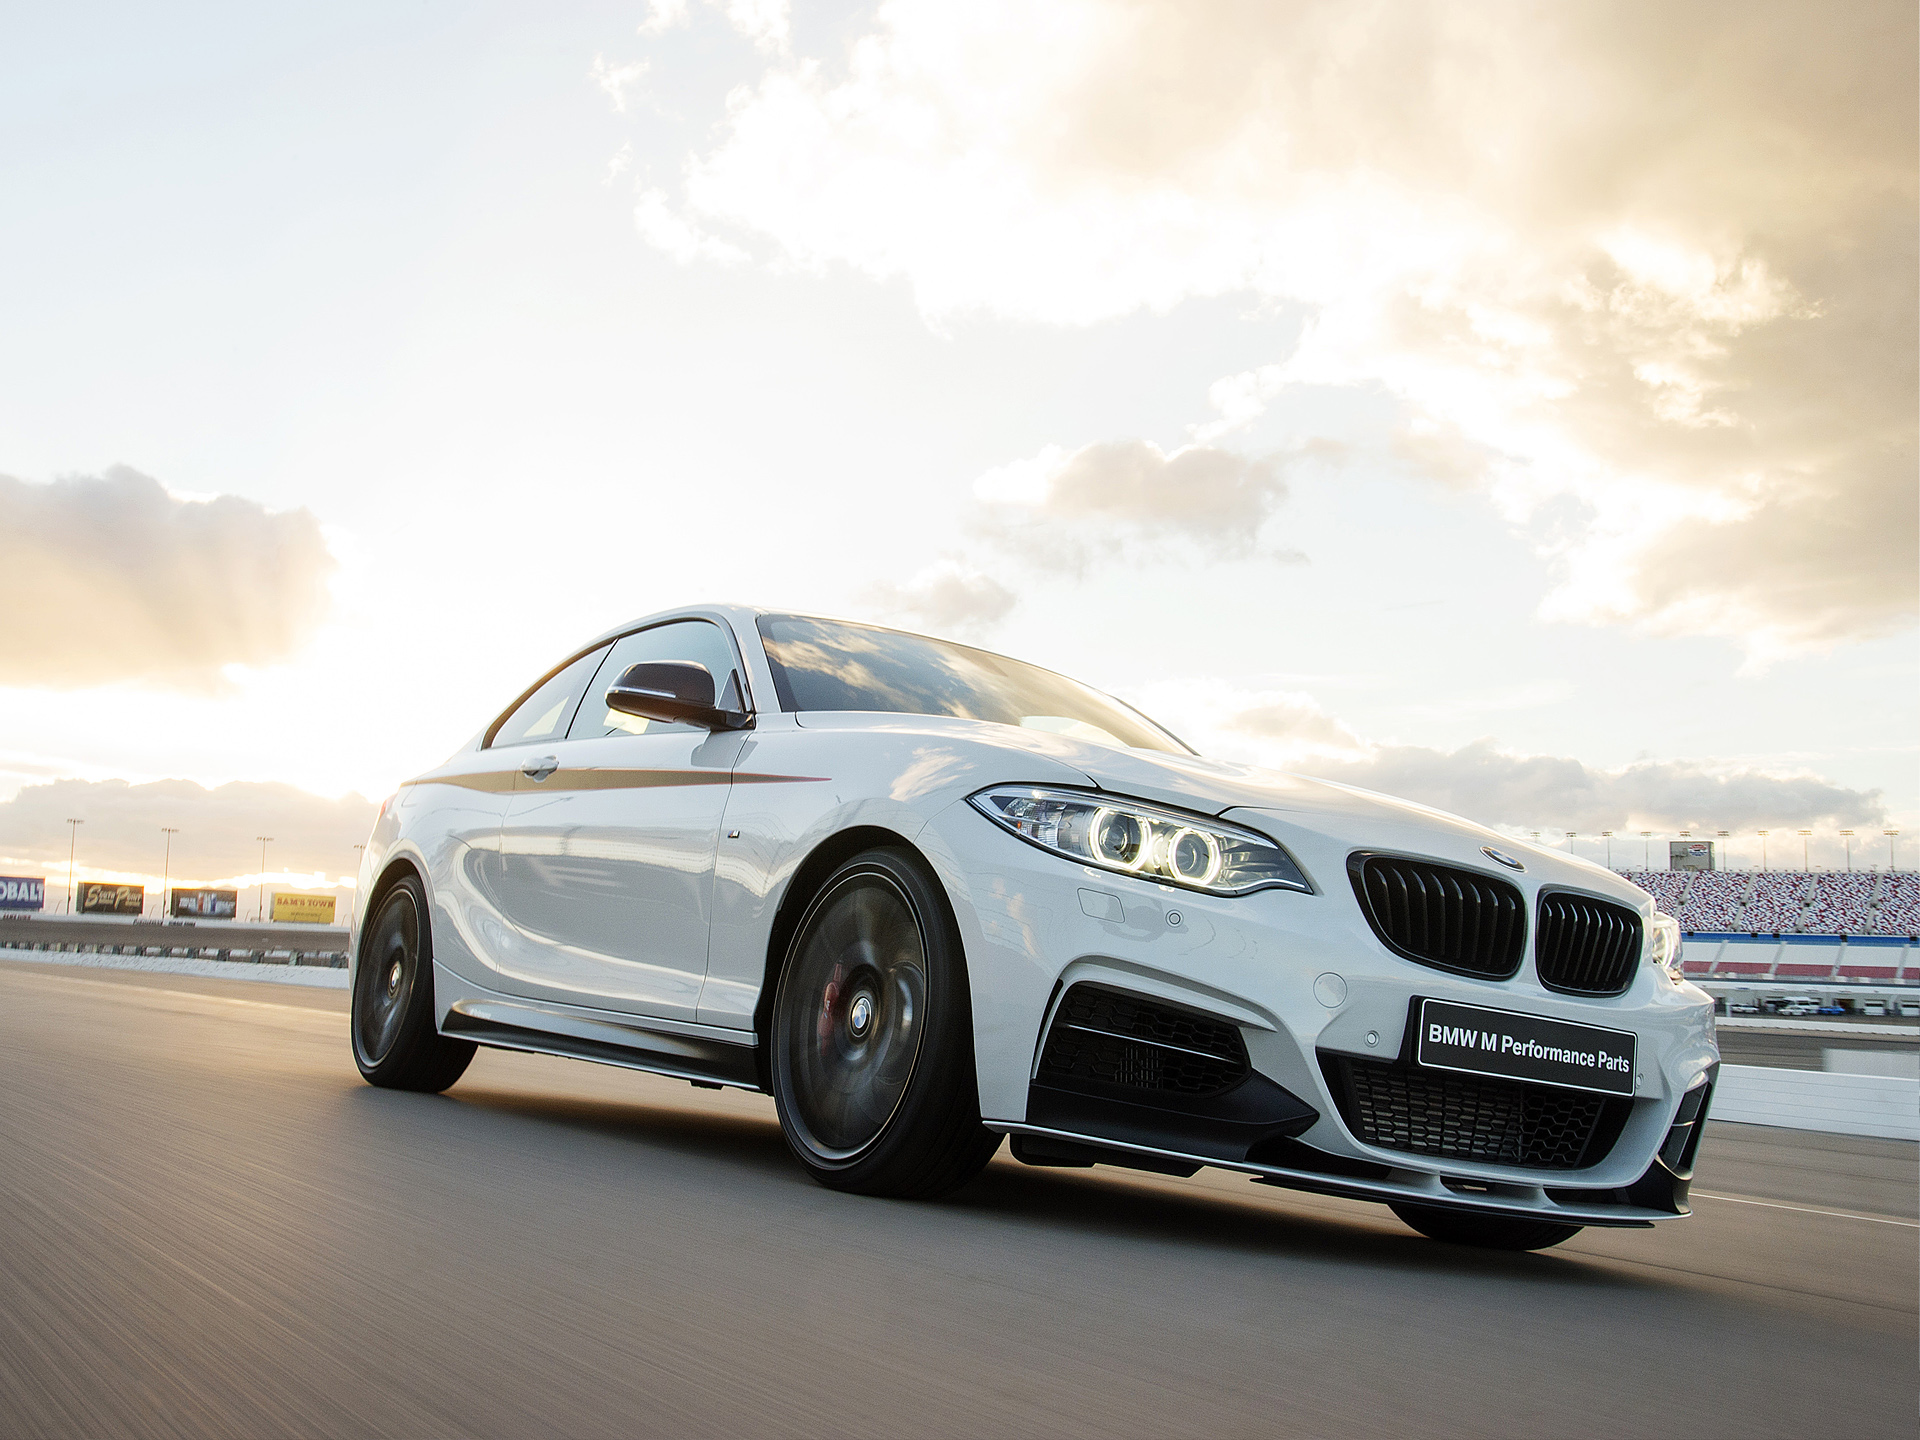  2014 BMW 2-Series Coupe M Performance Parts Wallpaper.